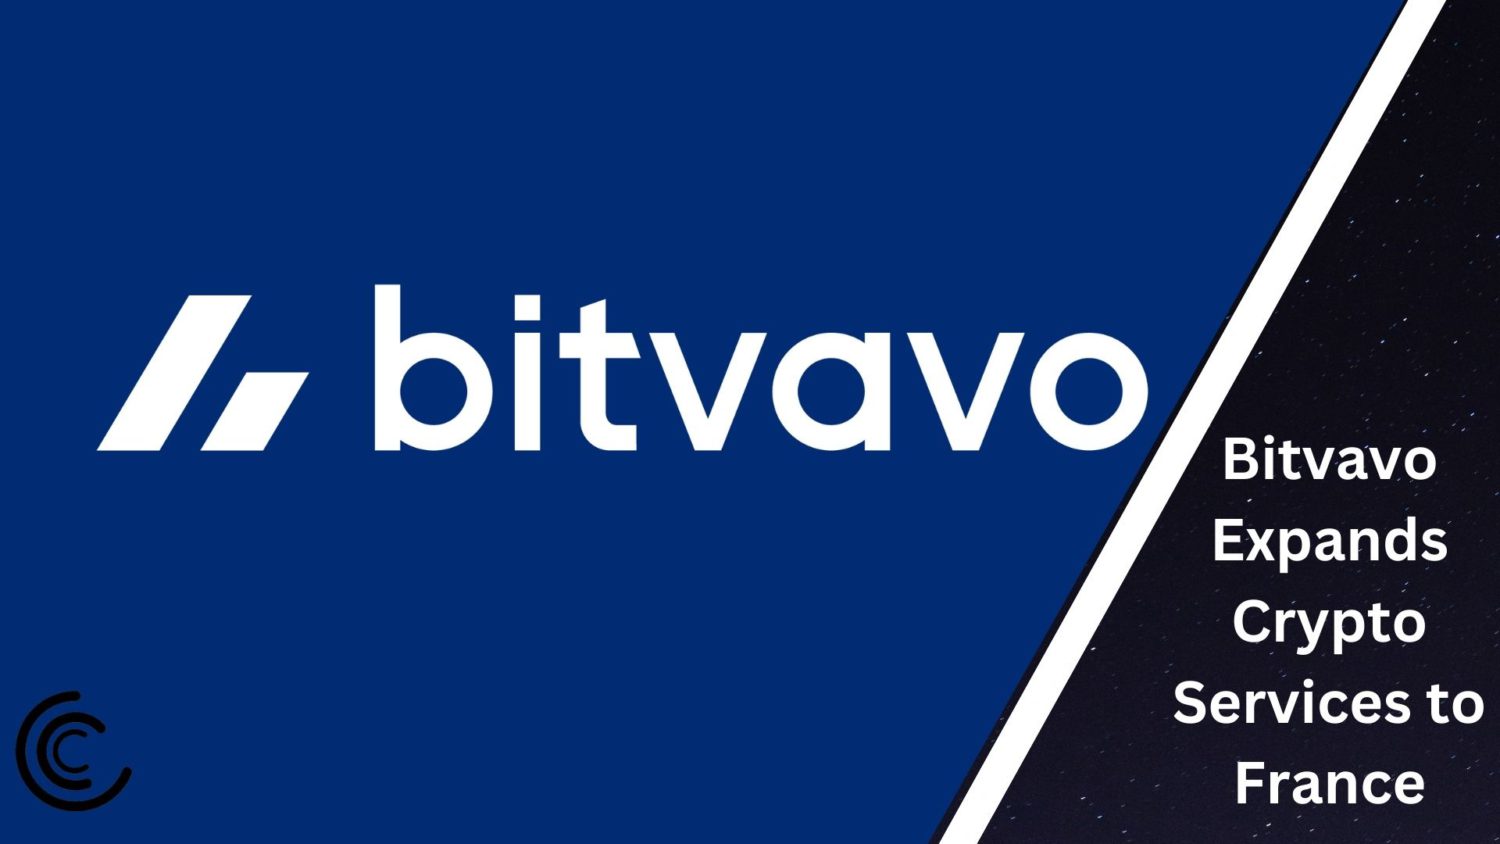 Bitvavo Expands Crypto Services To France Following Regulatory Approval